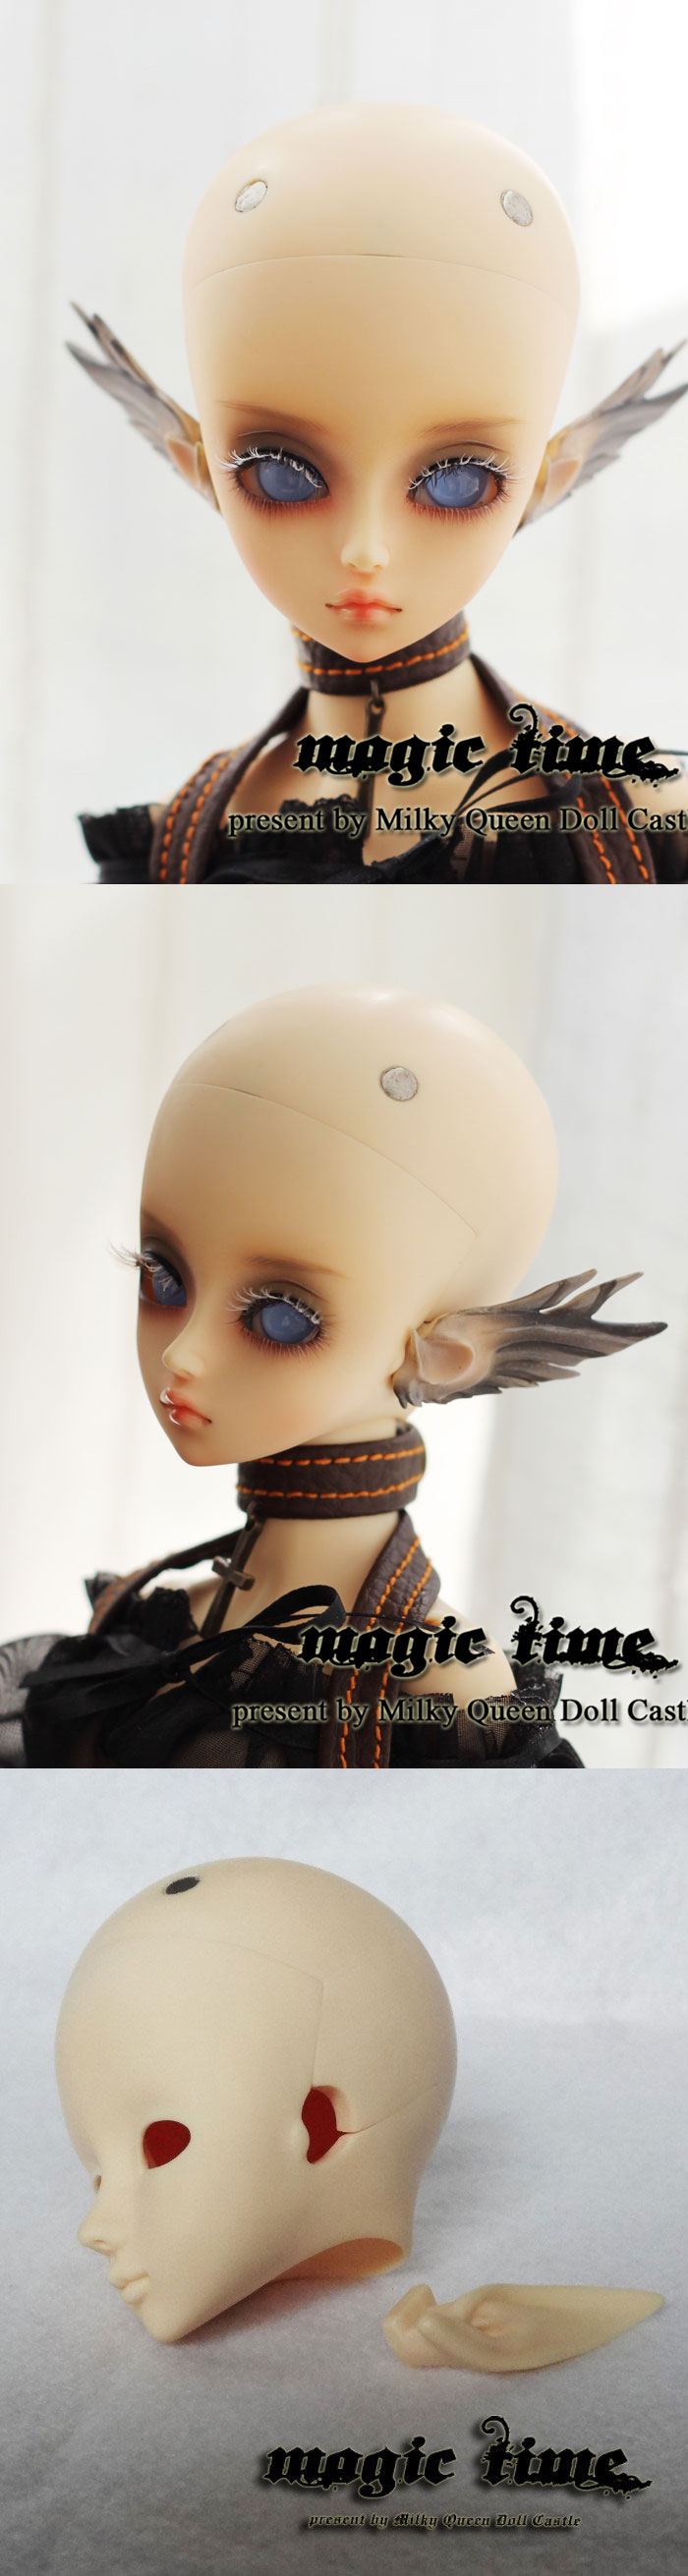 BJD Mechanicalears for MSD Size Ball-jointed doll